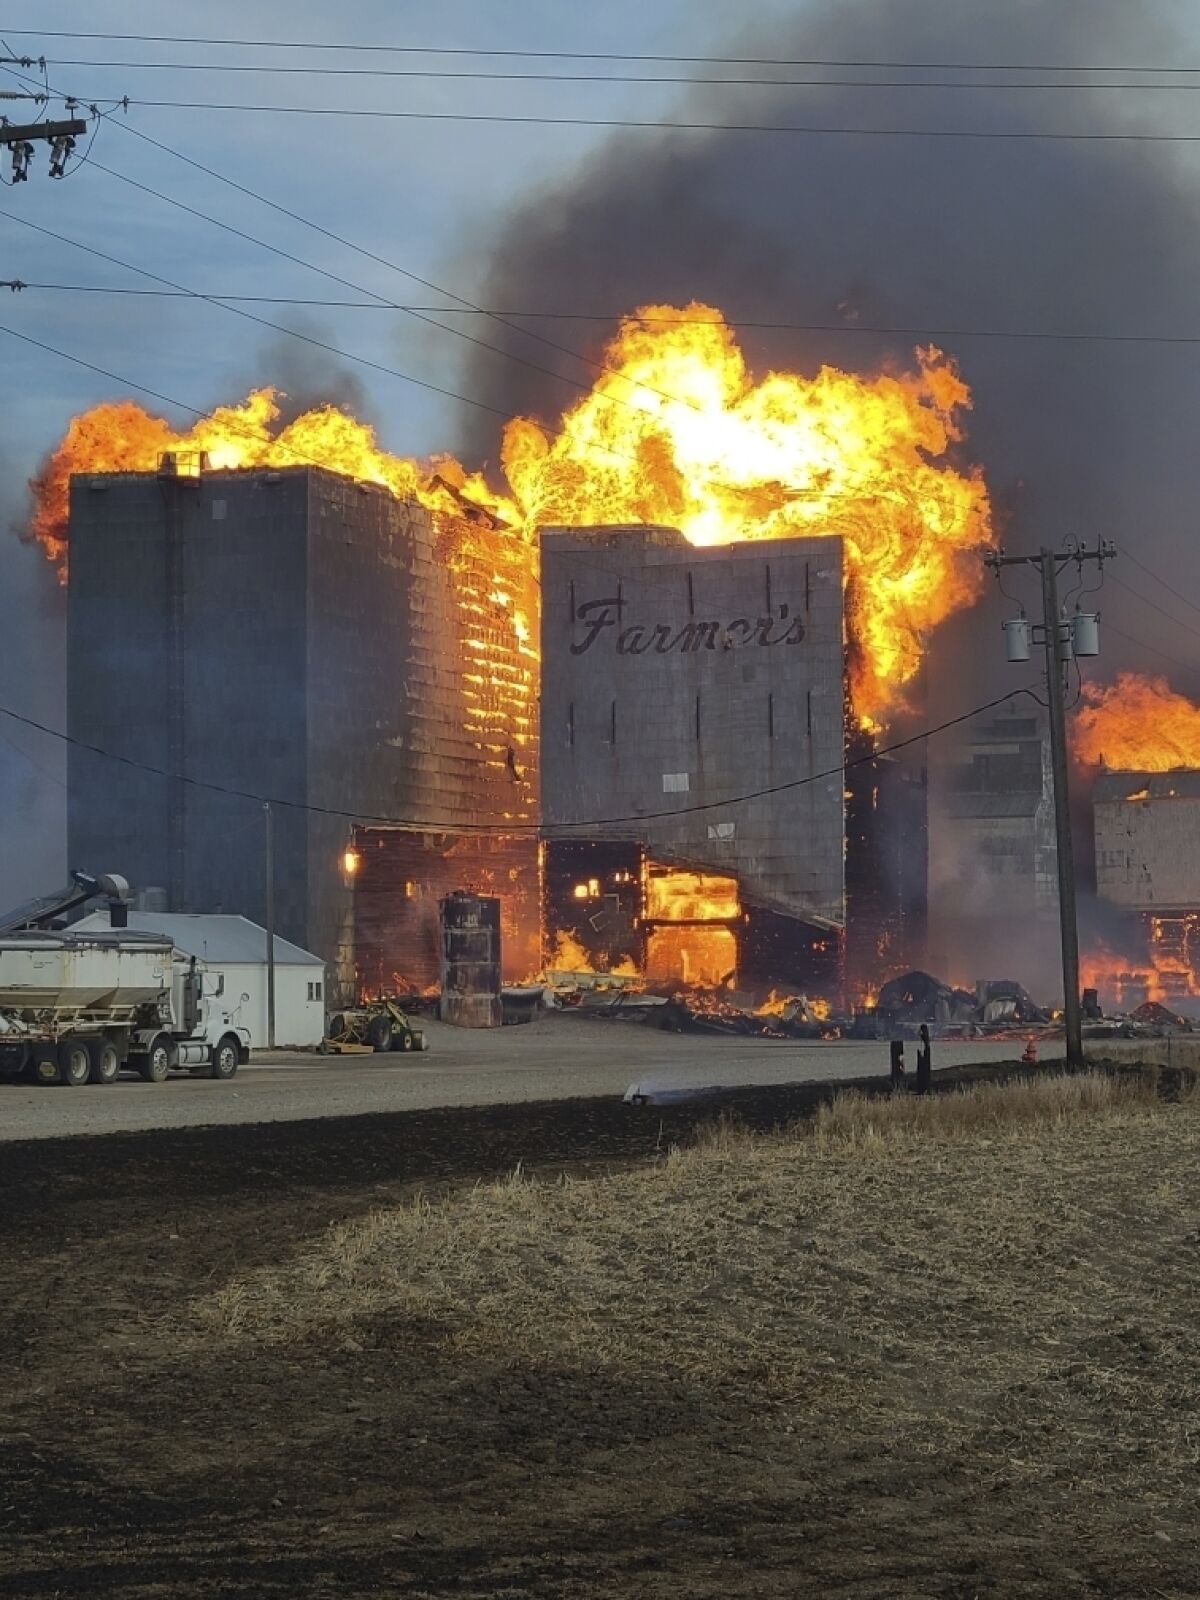 This photo provided by the Fergus County Sheriff's Office shows a grain elevator burning in the central Montana town of Denton on Wednesday, Dec. 1, 2021. A late-season wildfire pushed by strong winds ripped through the tiny central Montana farming community burning two dozen homes and four grain elevators. About 300 residents were evacuated early Wednesday afternoon and the evacuation orders were lifted Thursday. (Fergus County Sheriff's Office via AP)